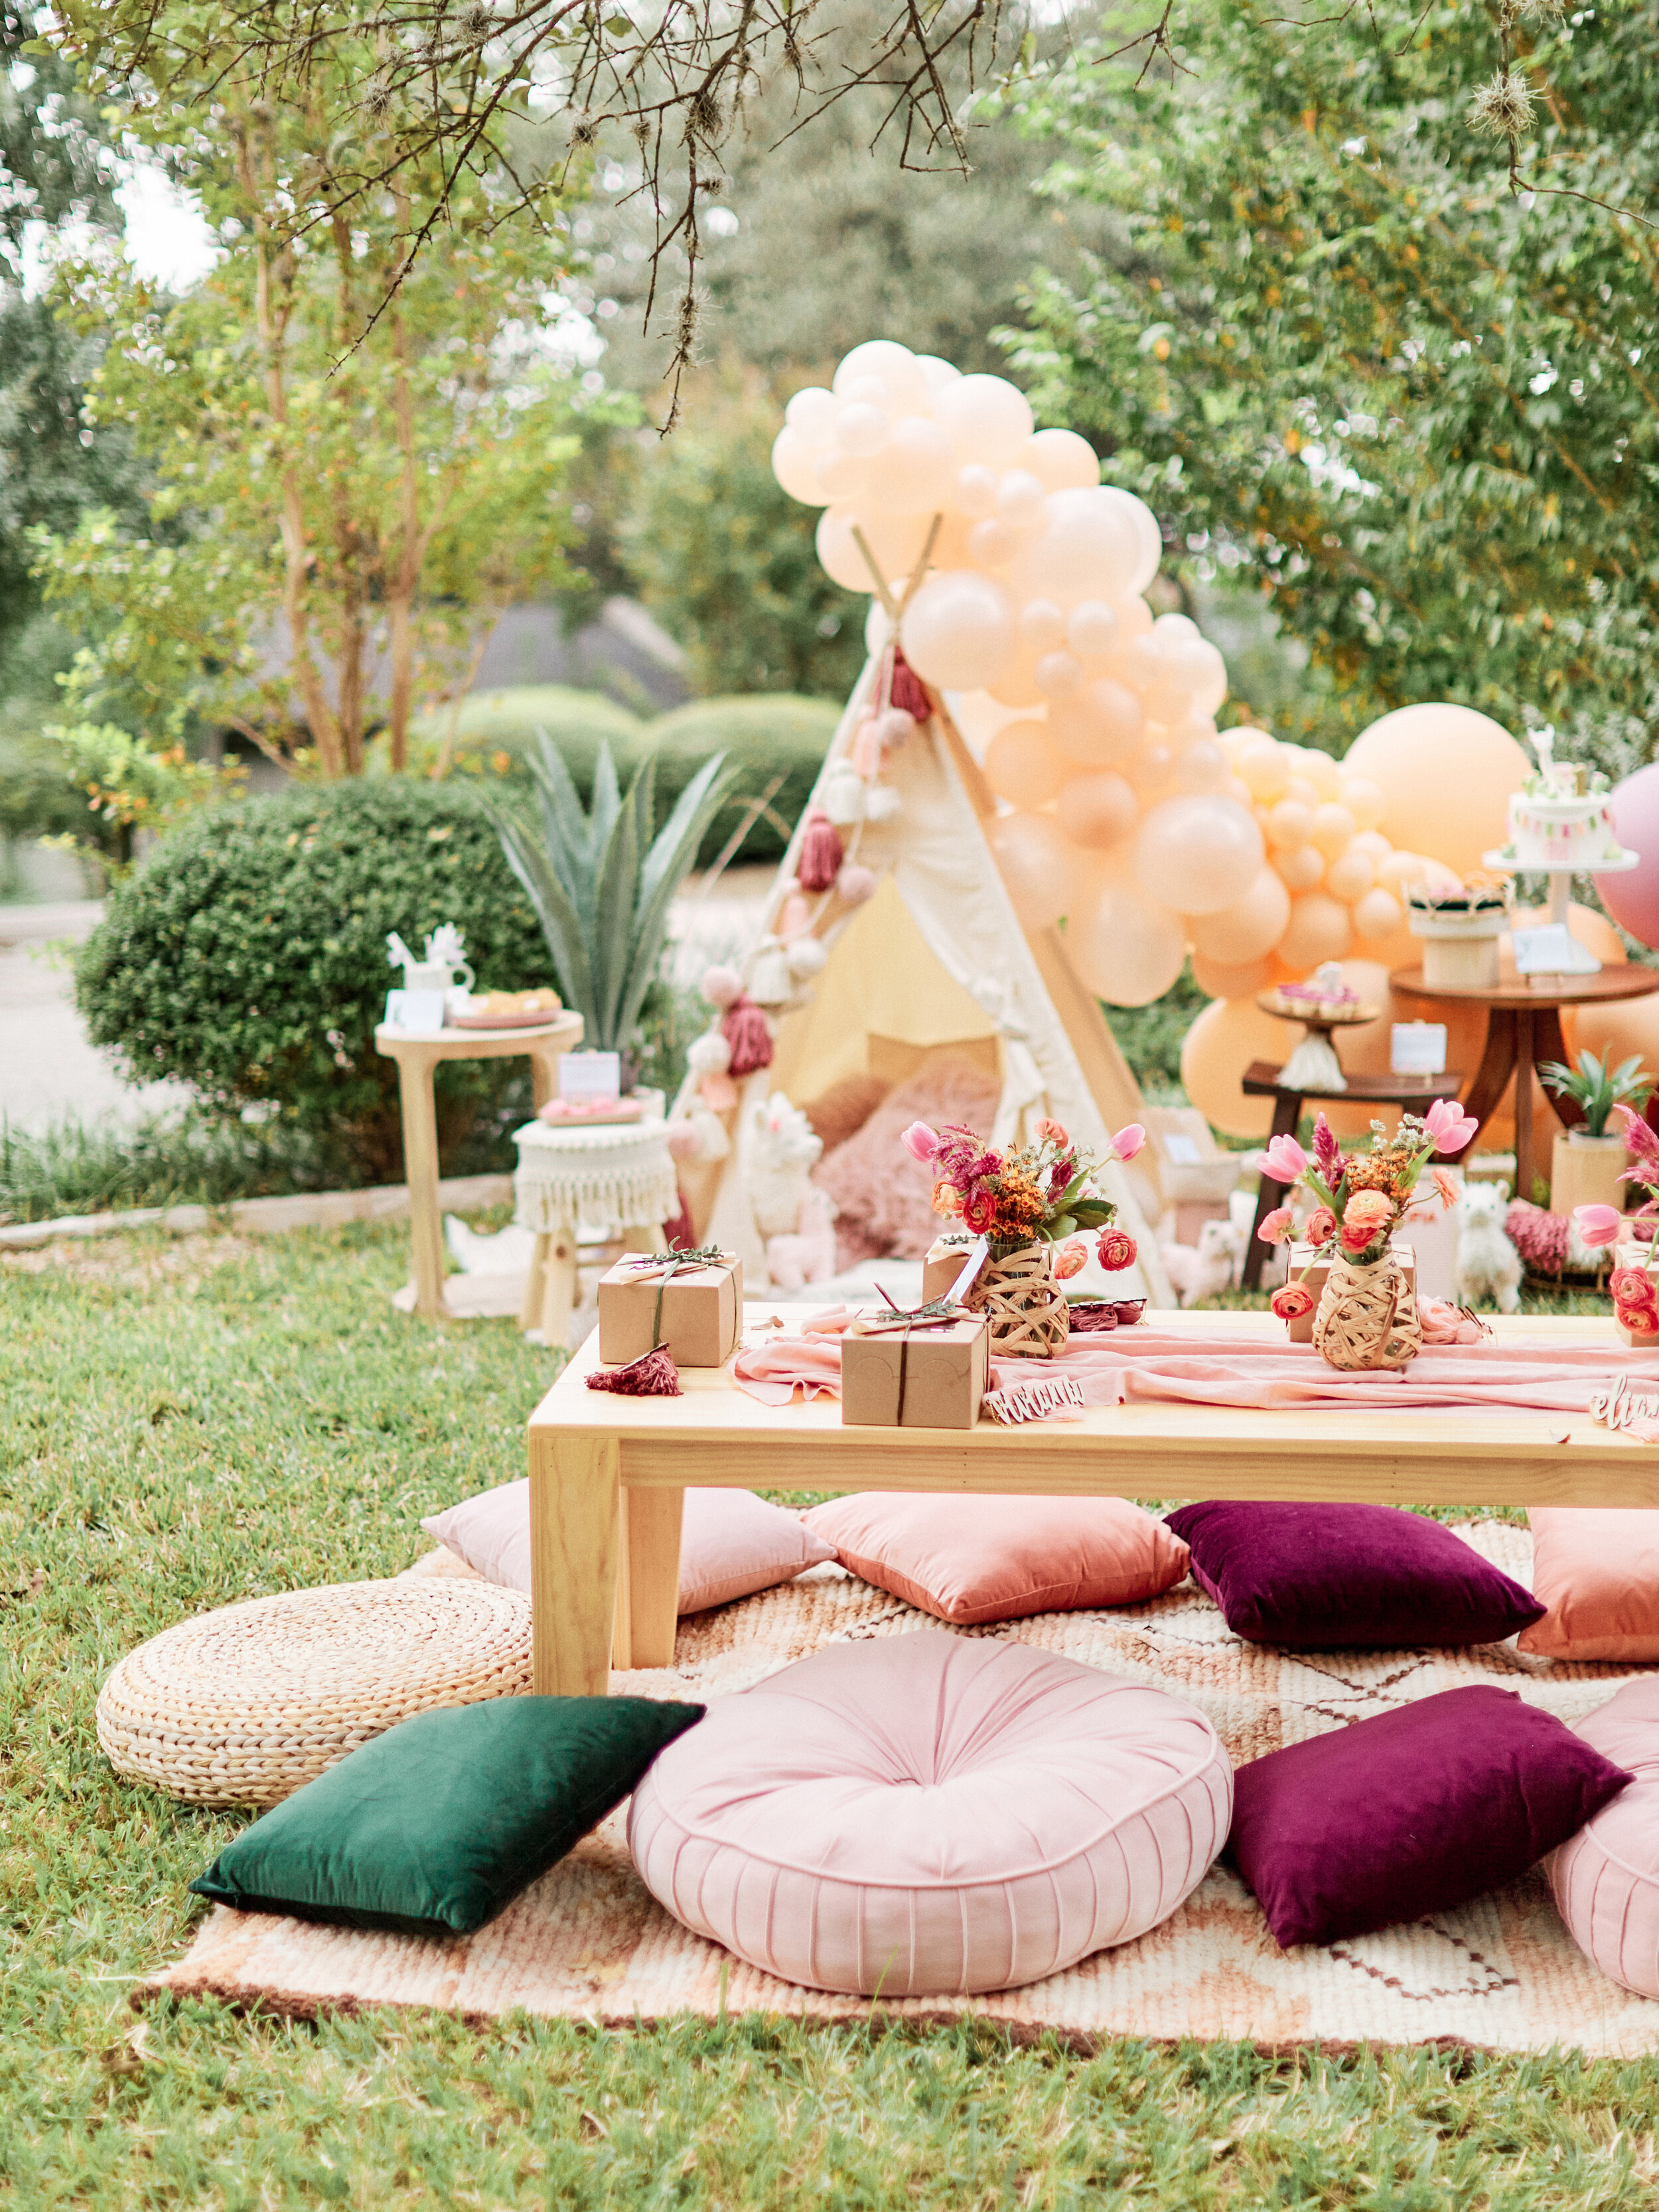 Comfortable picnic party seating - get details and more party inspiration now at minteventdesign.com!